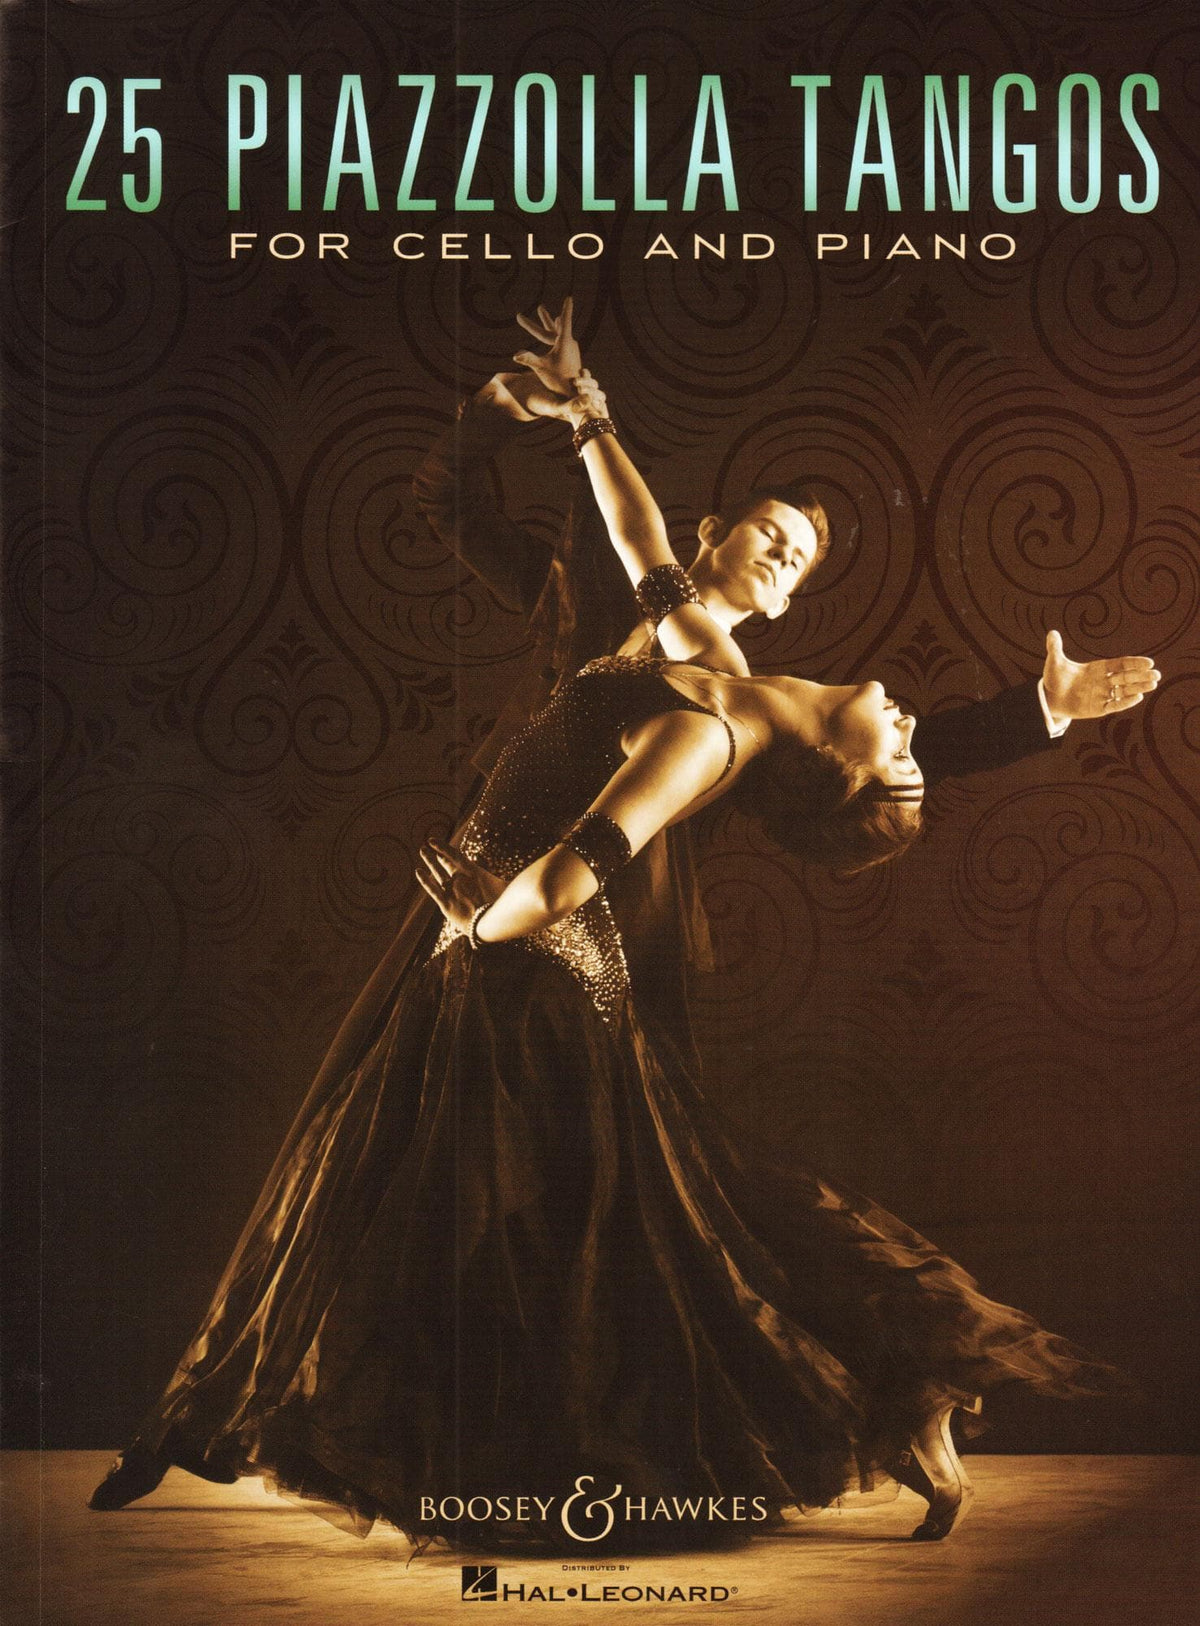 Piazzolla, Astor - 25 Piazzolla Tangos - for Cello and Piano - Boosey & Hawkes